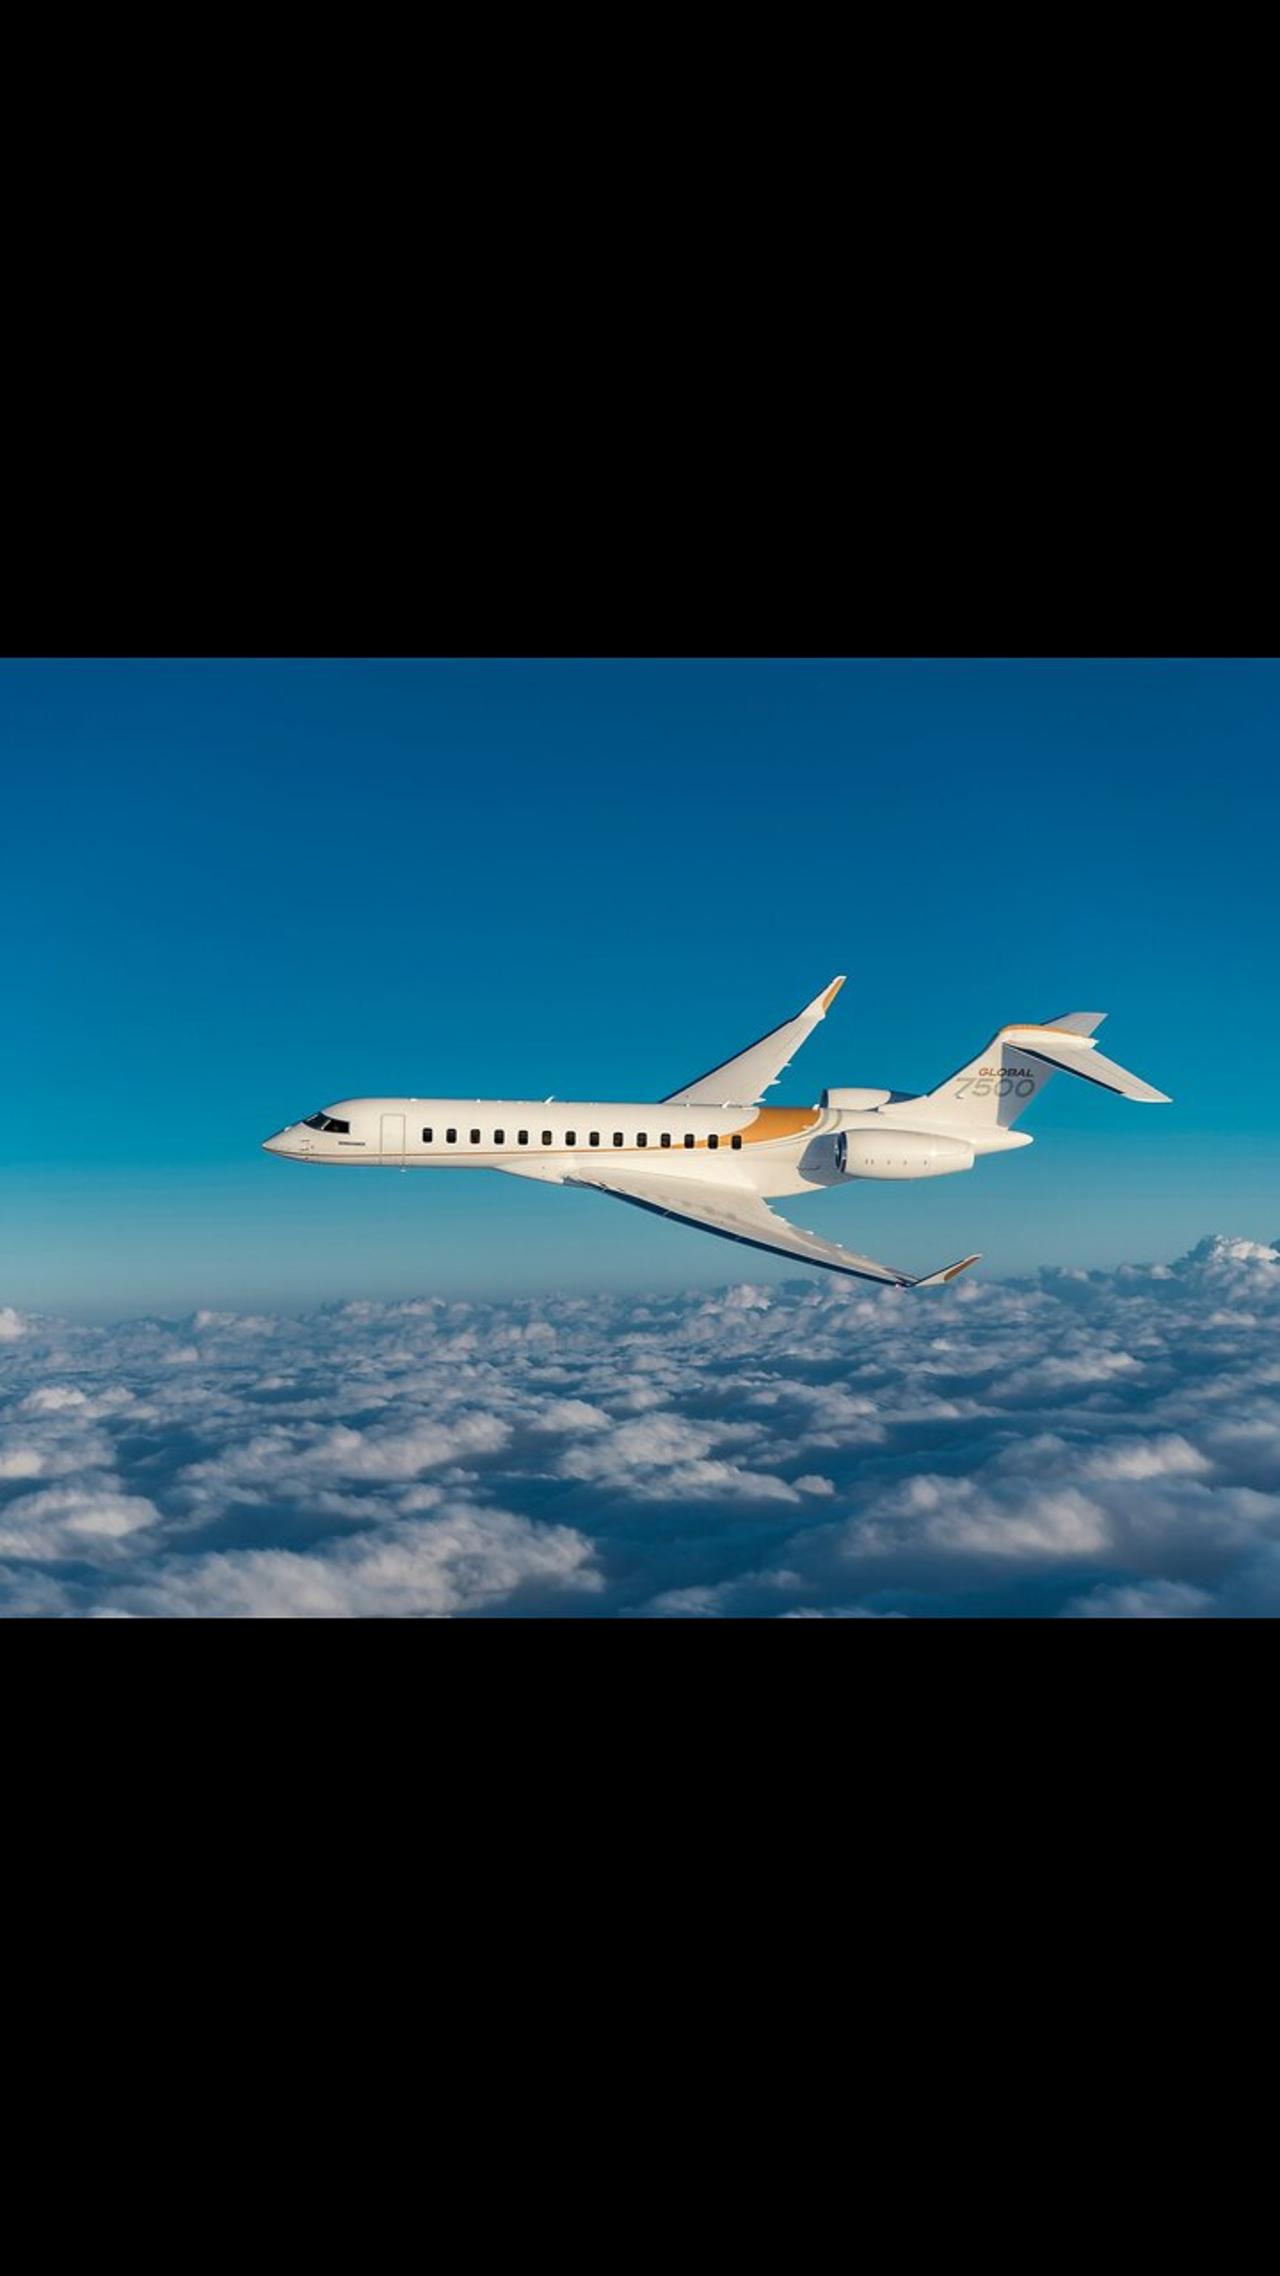 Bombardier Global 7500 and Global 8000 Business Jets